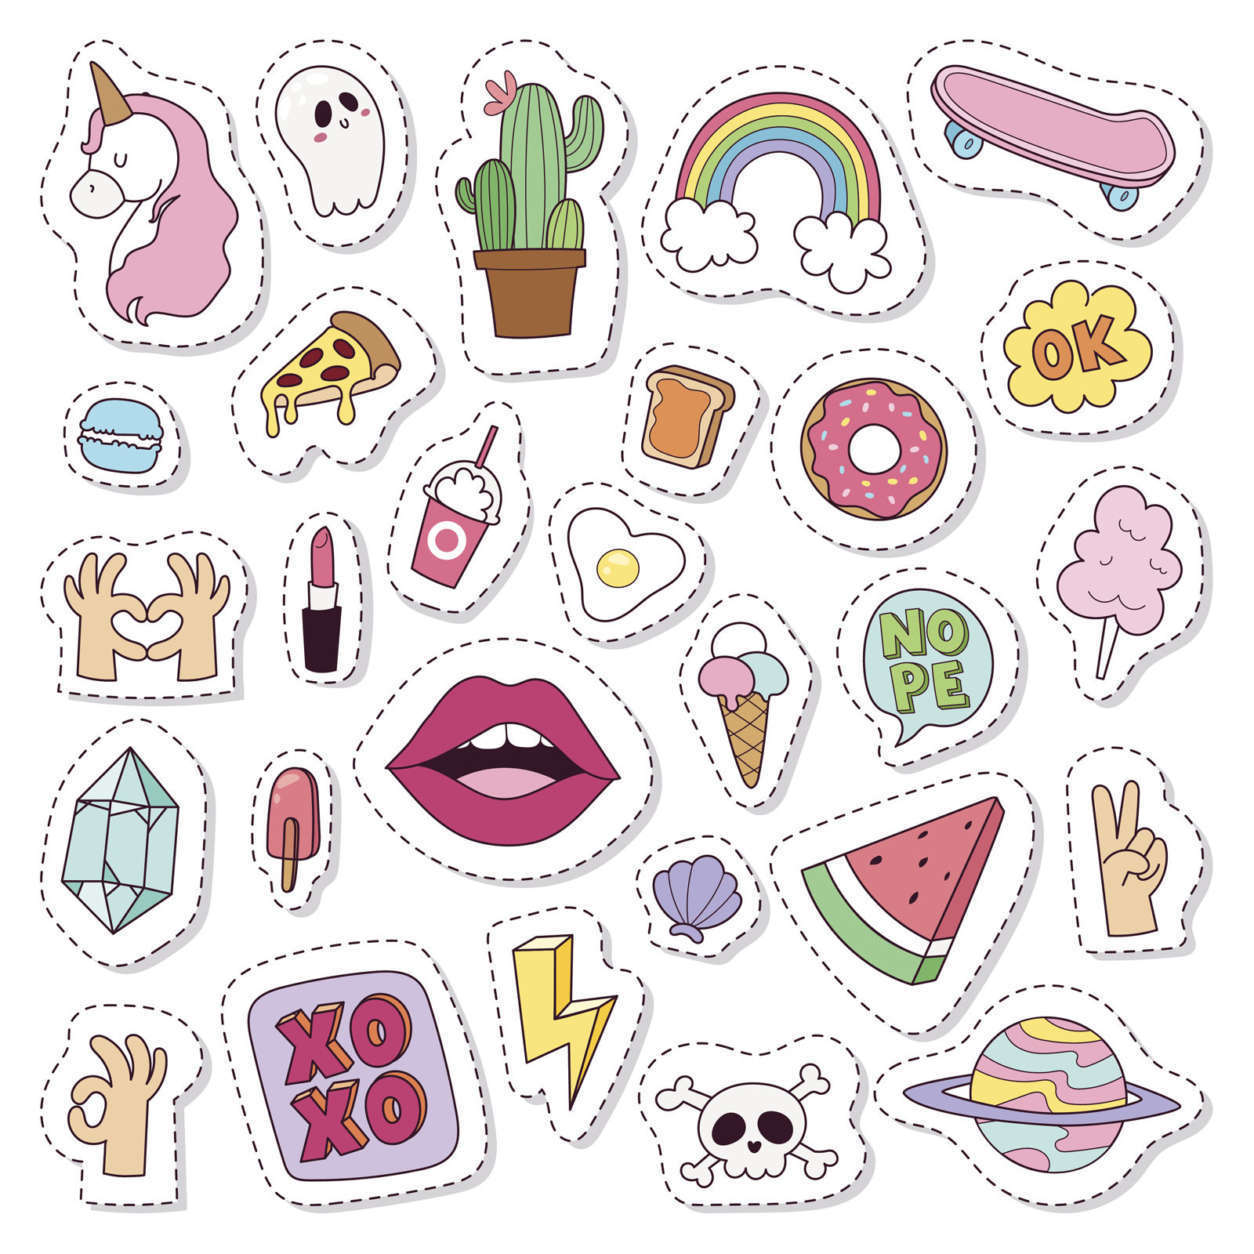 Hipster patches elements like lips, ok sign and diamond hand drawn vector. Cute fashionable stickers collection. Doodle pop art sketch pins and comic badges vector set.